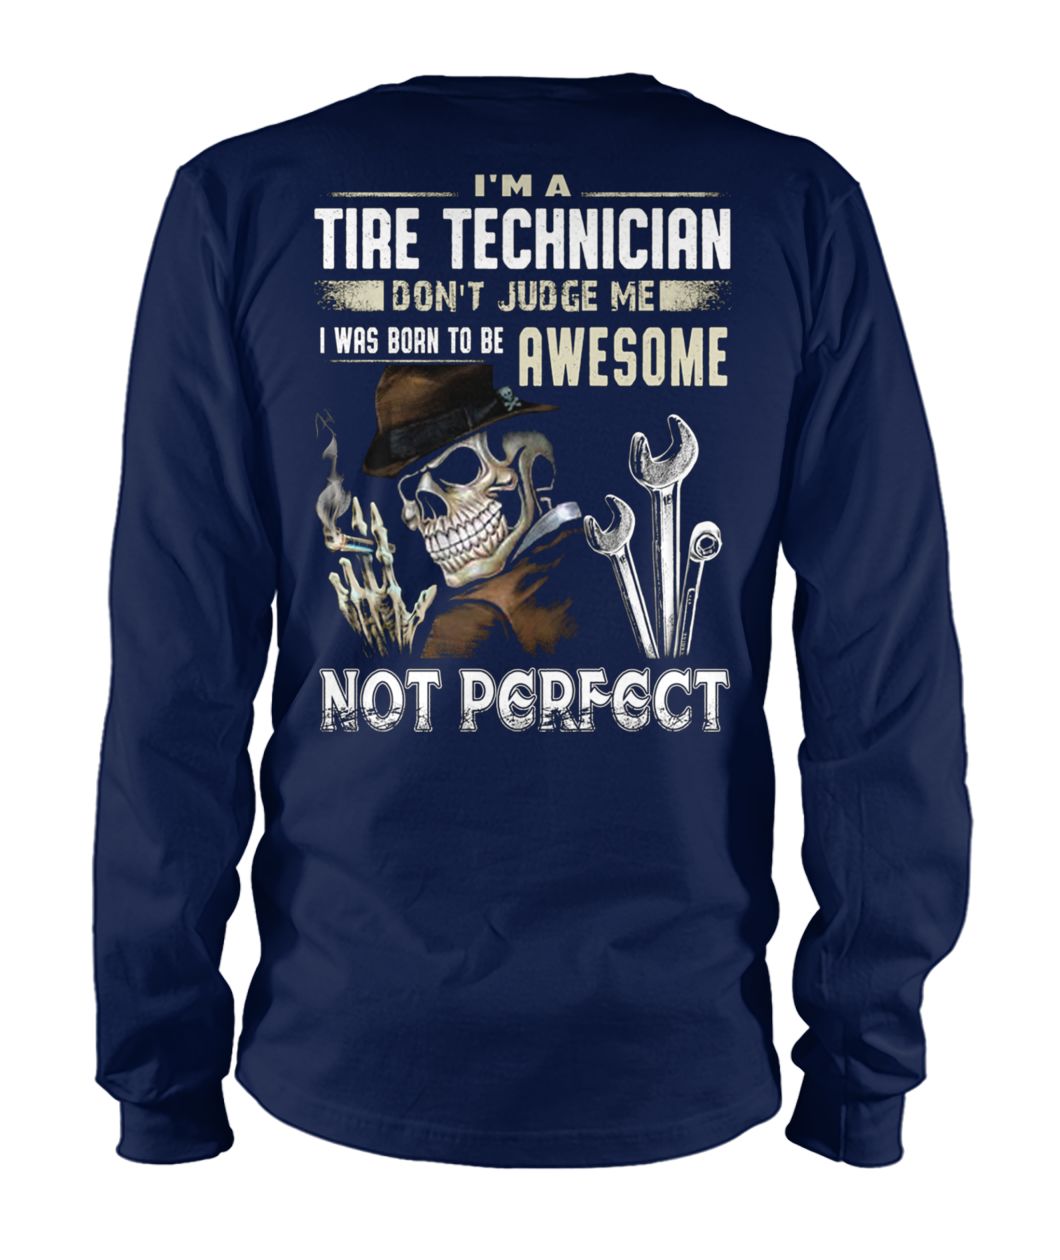 I'm a tire technician don't judge me I was born to be awesome not perfect unisex long sleeve